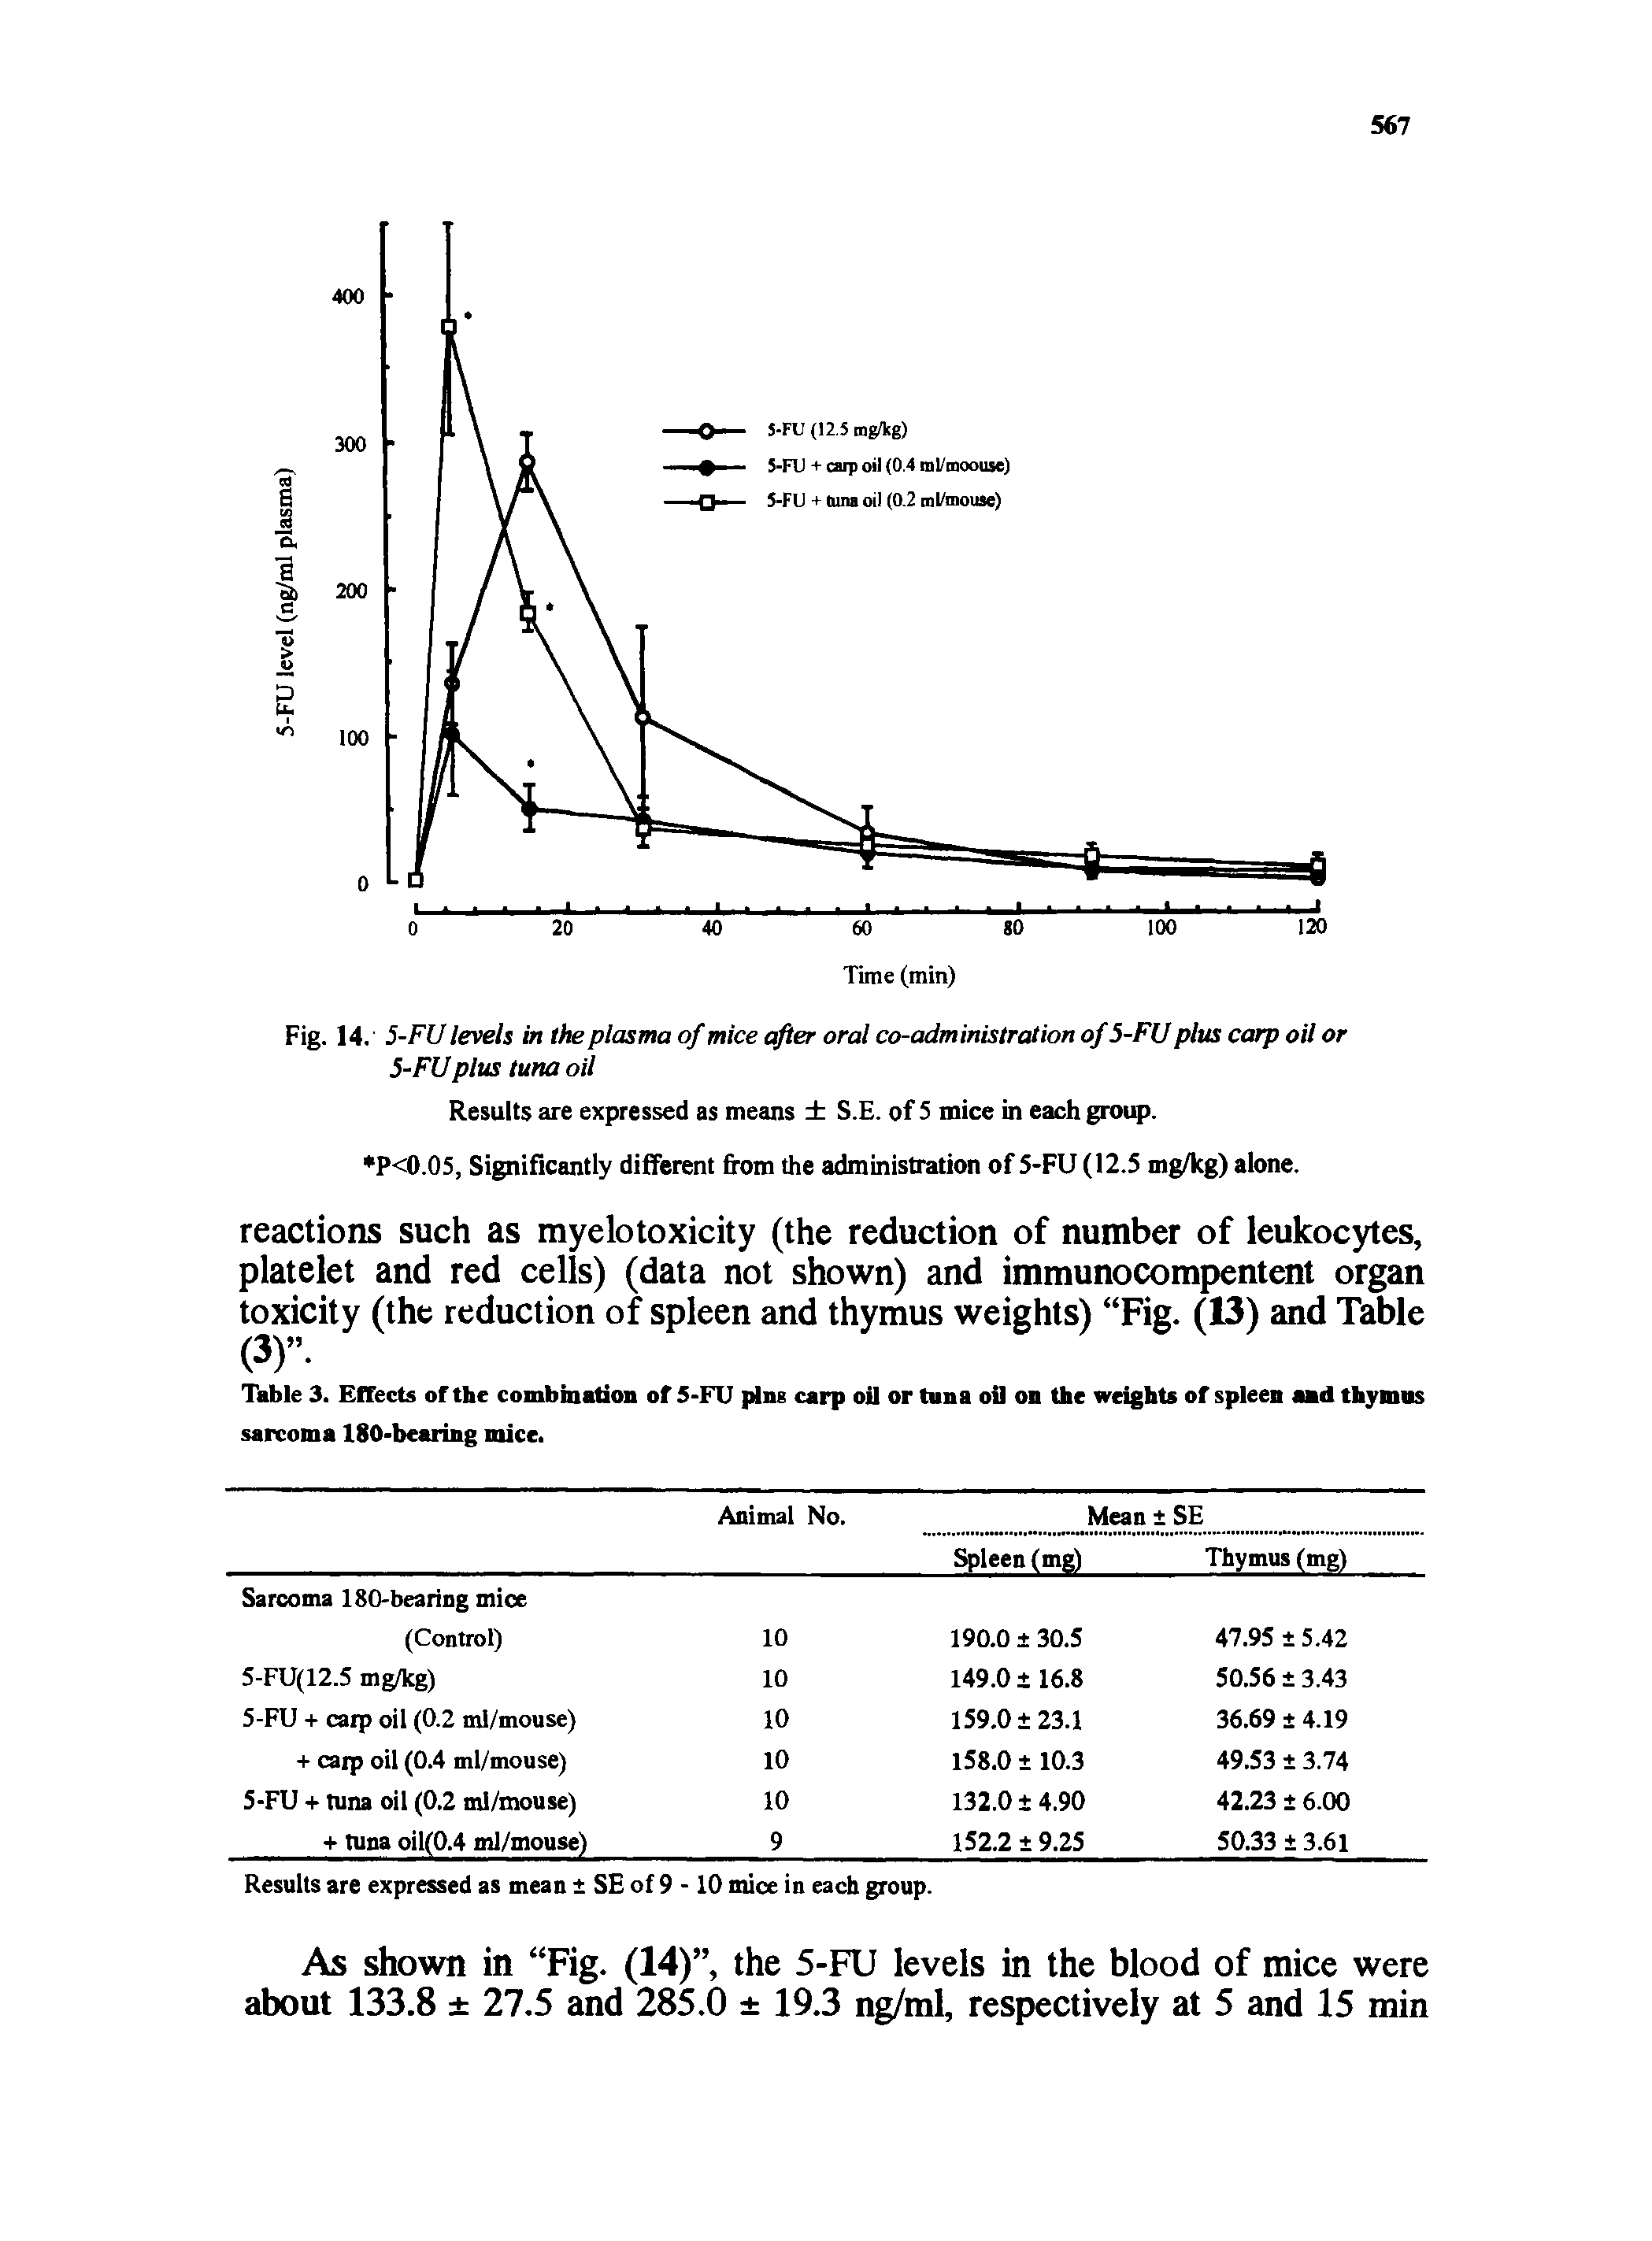 Table 3. Effects of the combination of 5-FU pins carp oil or tuna oil on the weights of spleen and thymus sarcoma 180-bearing mice.